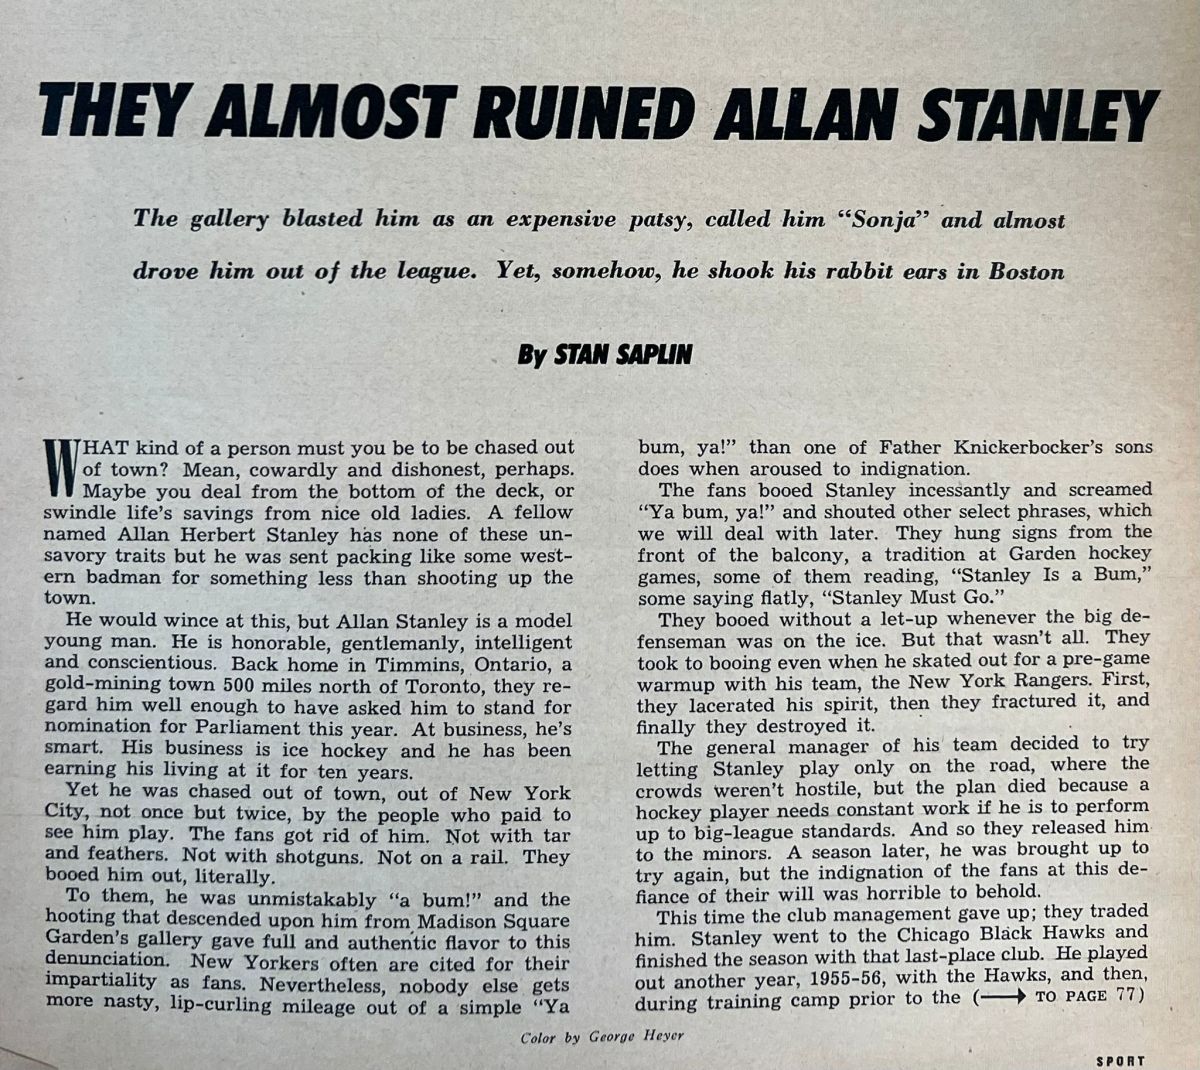 Sport magazine article: "They Almost Ruined Allan Stanley"